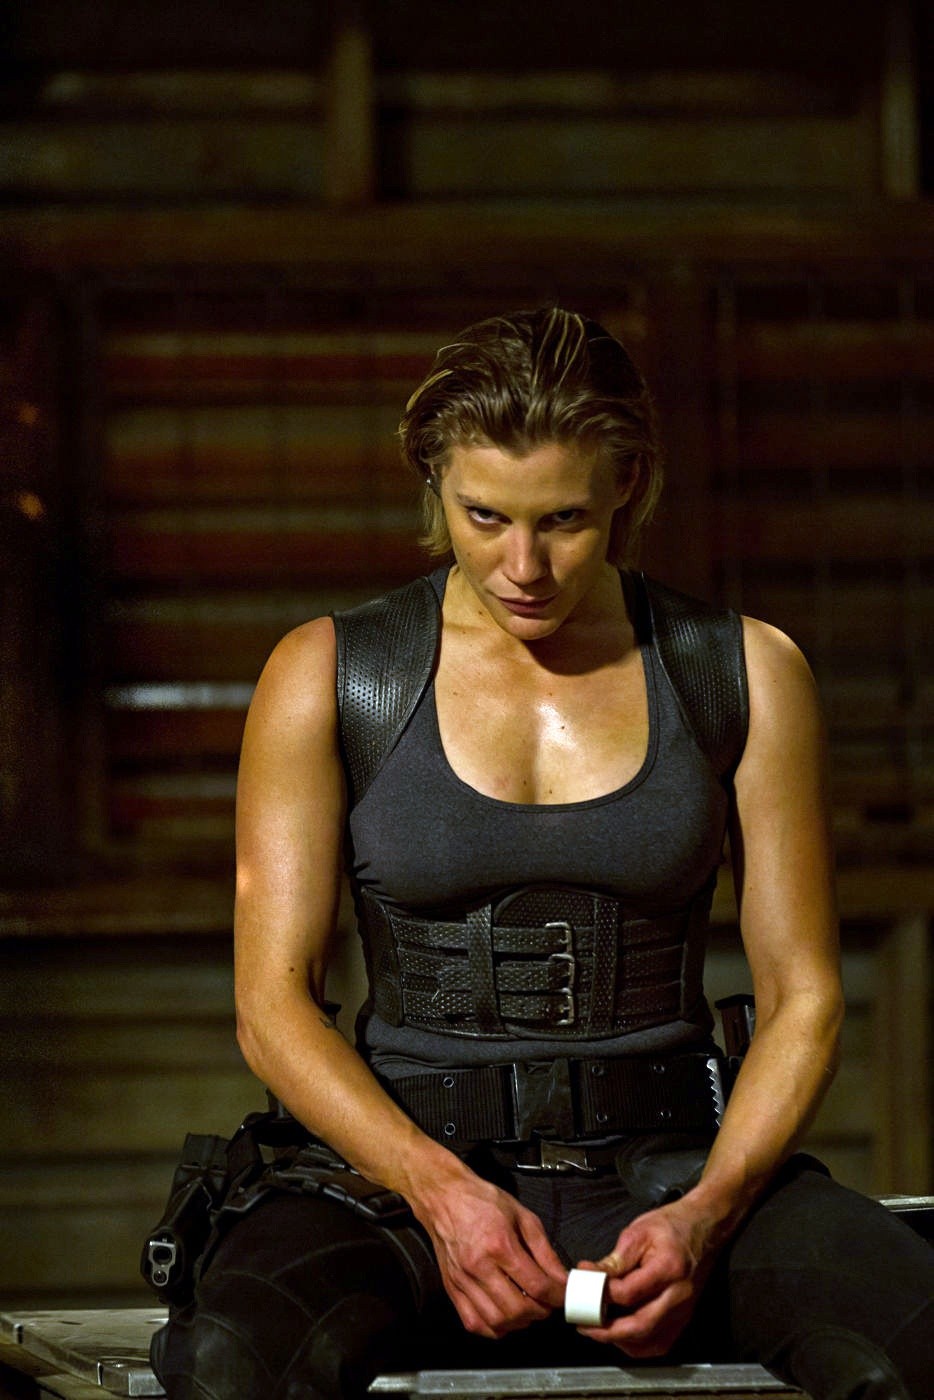 Katee Sackhoff stars as Dahl in Universal Pictures' Riddick (2013)